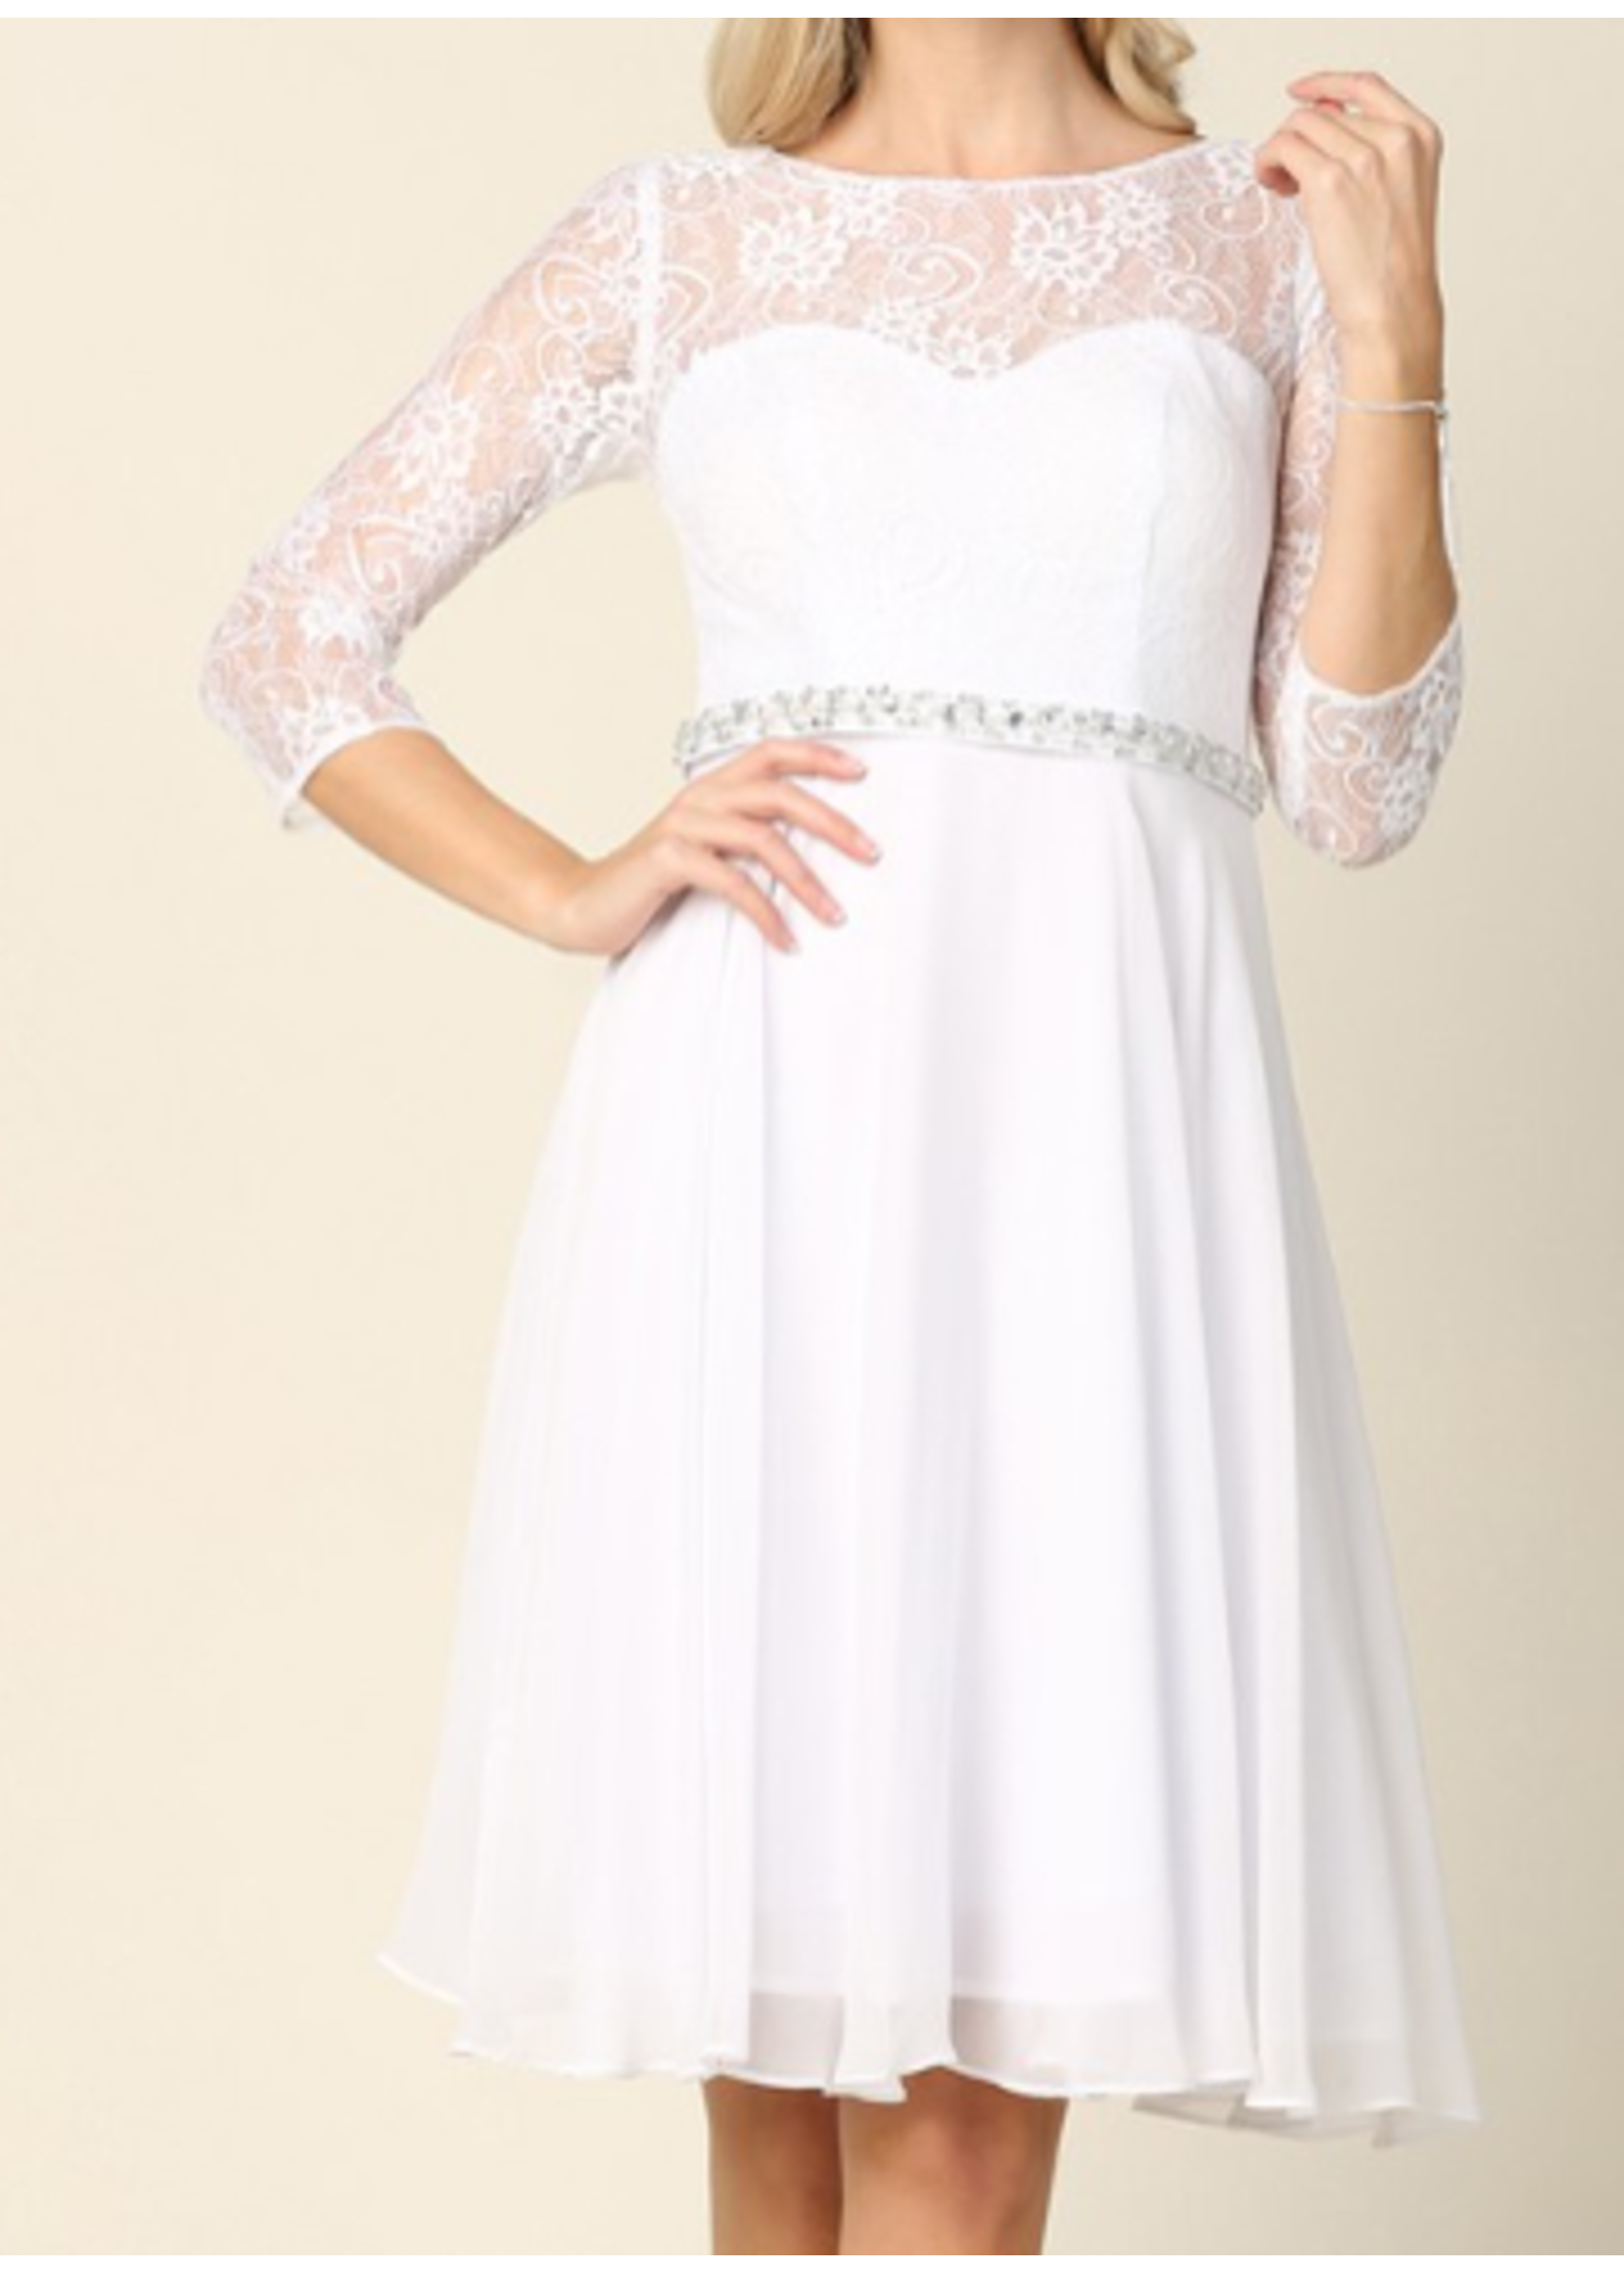 CONFIRMATION DRESS -  3/4 LACE SLEEVED DRESS